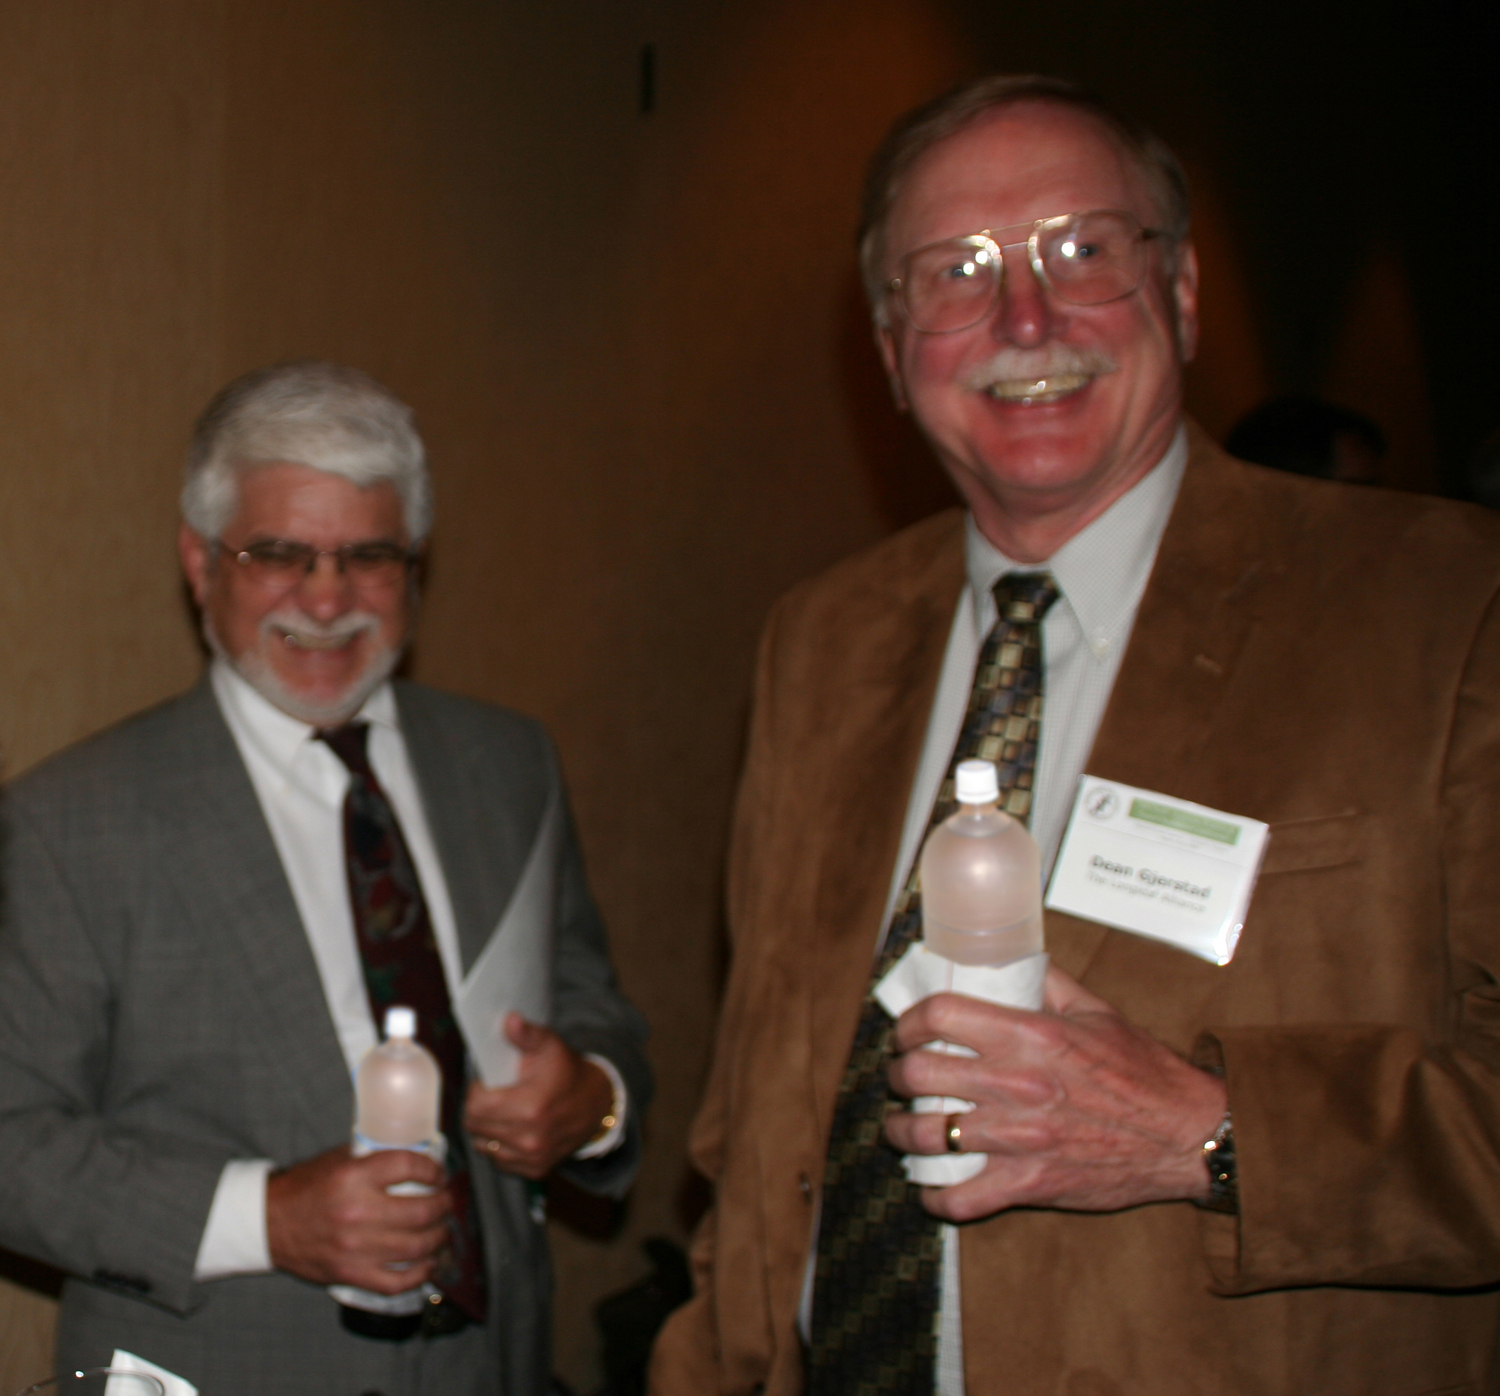 The visionary roles of Rhett Johnson (L) and Dean Gjerstad, co-founders of the Longleaf Alliance, were gratefully acknowledged